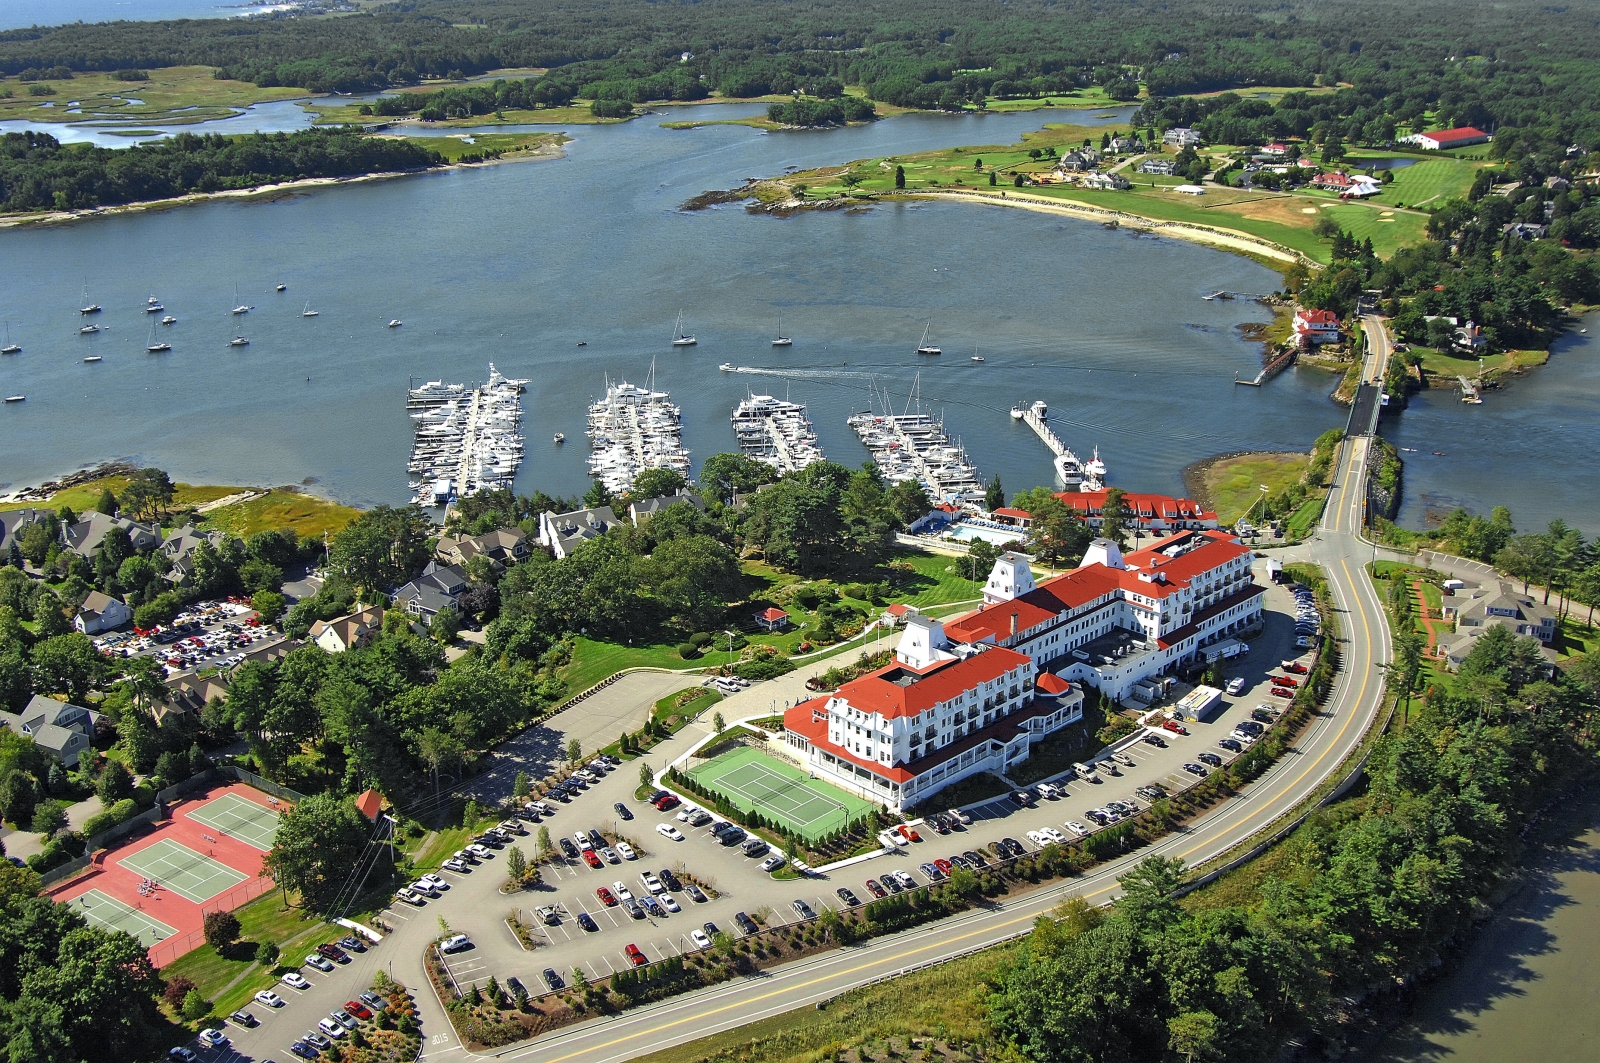 Boating on the East Coast - Where to Eat and Stay